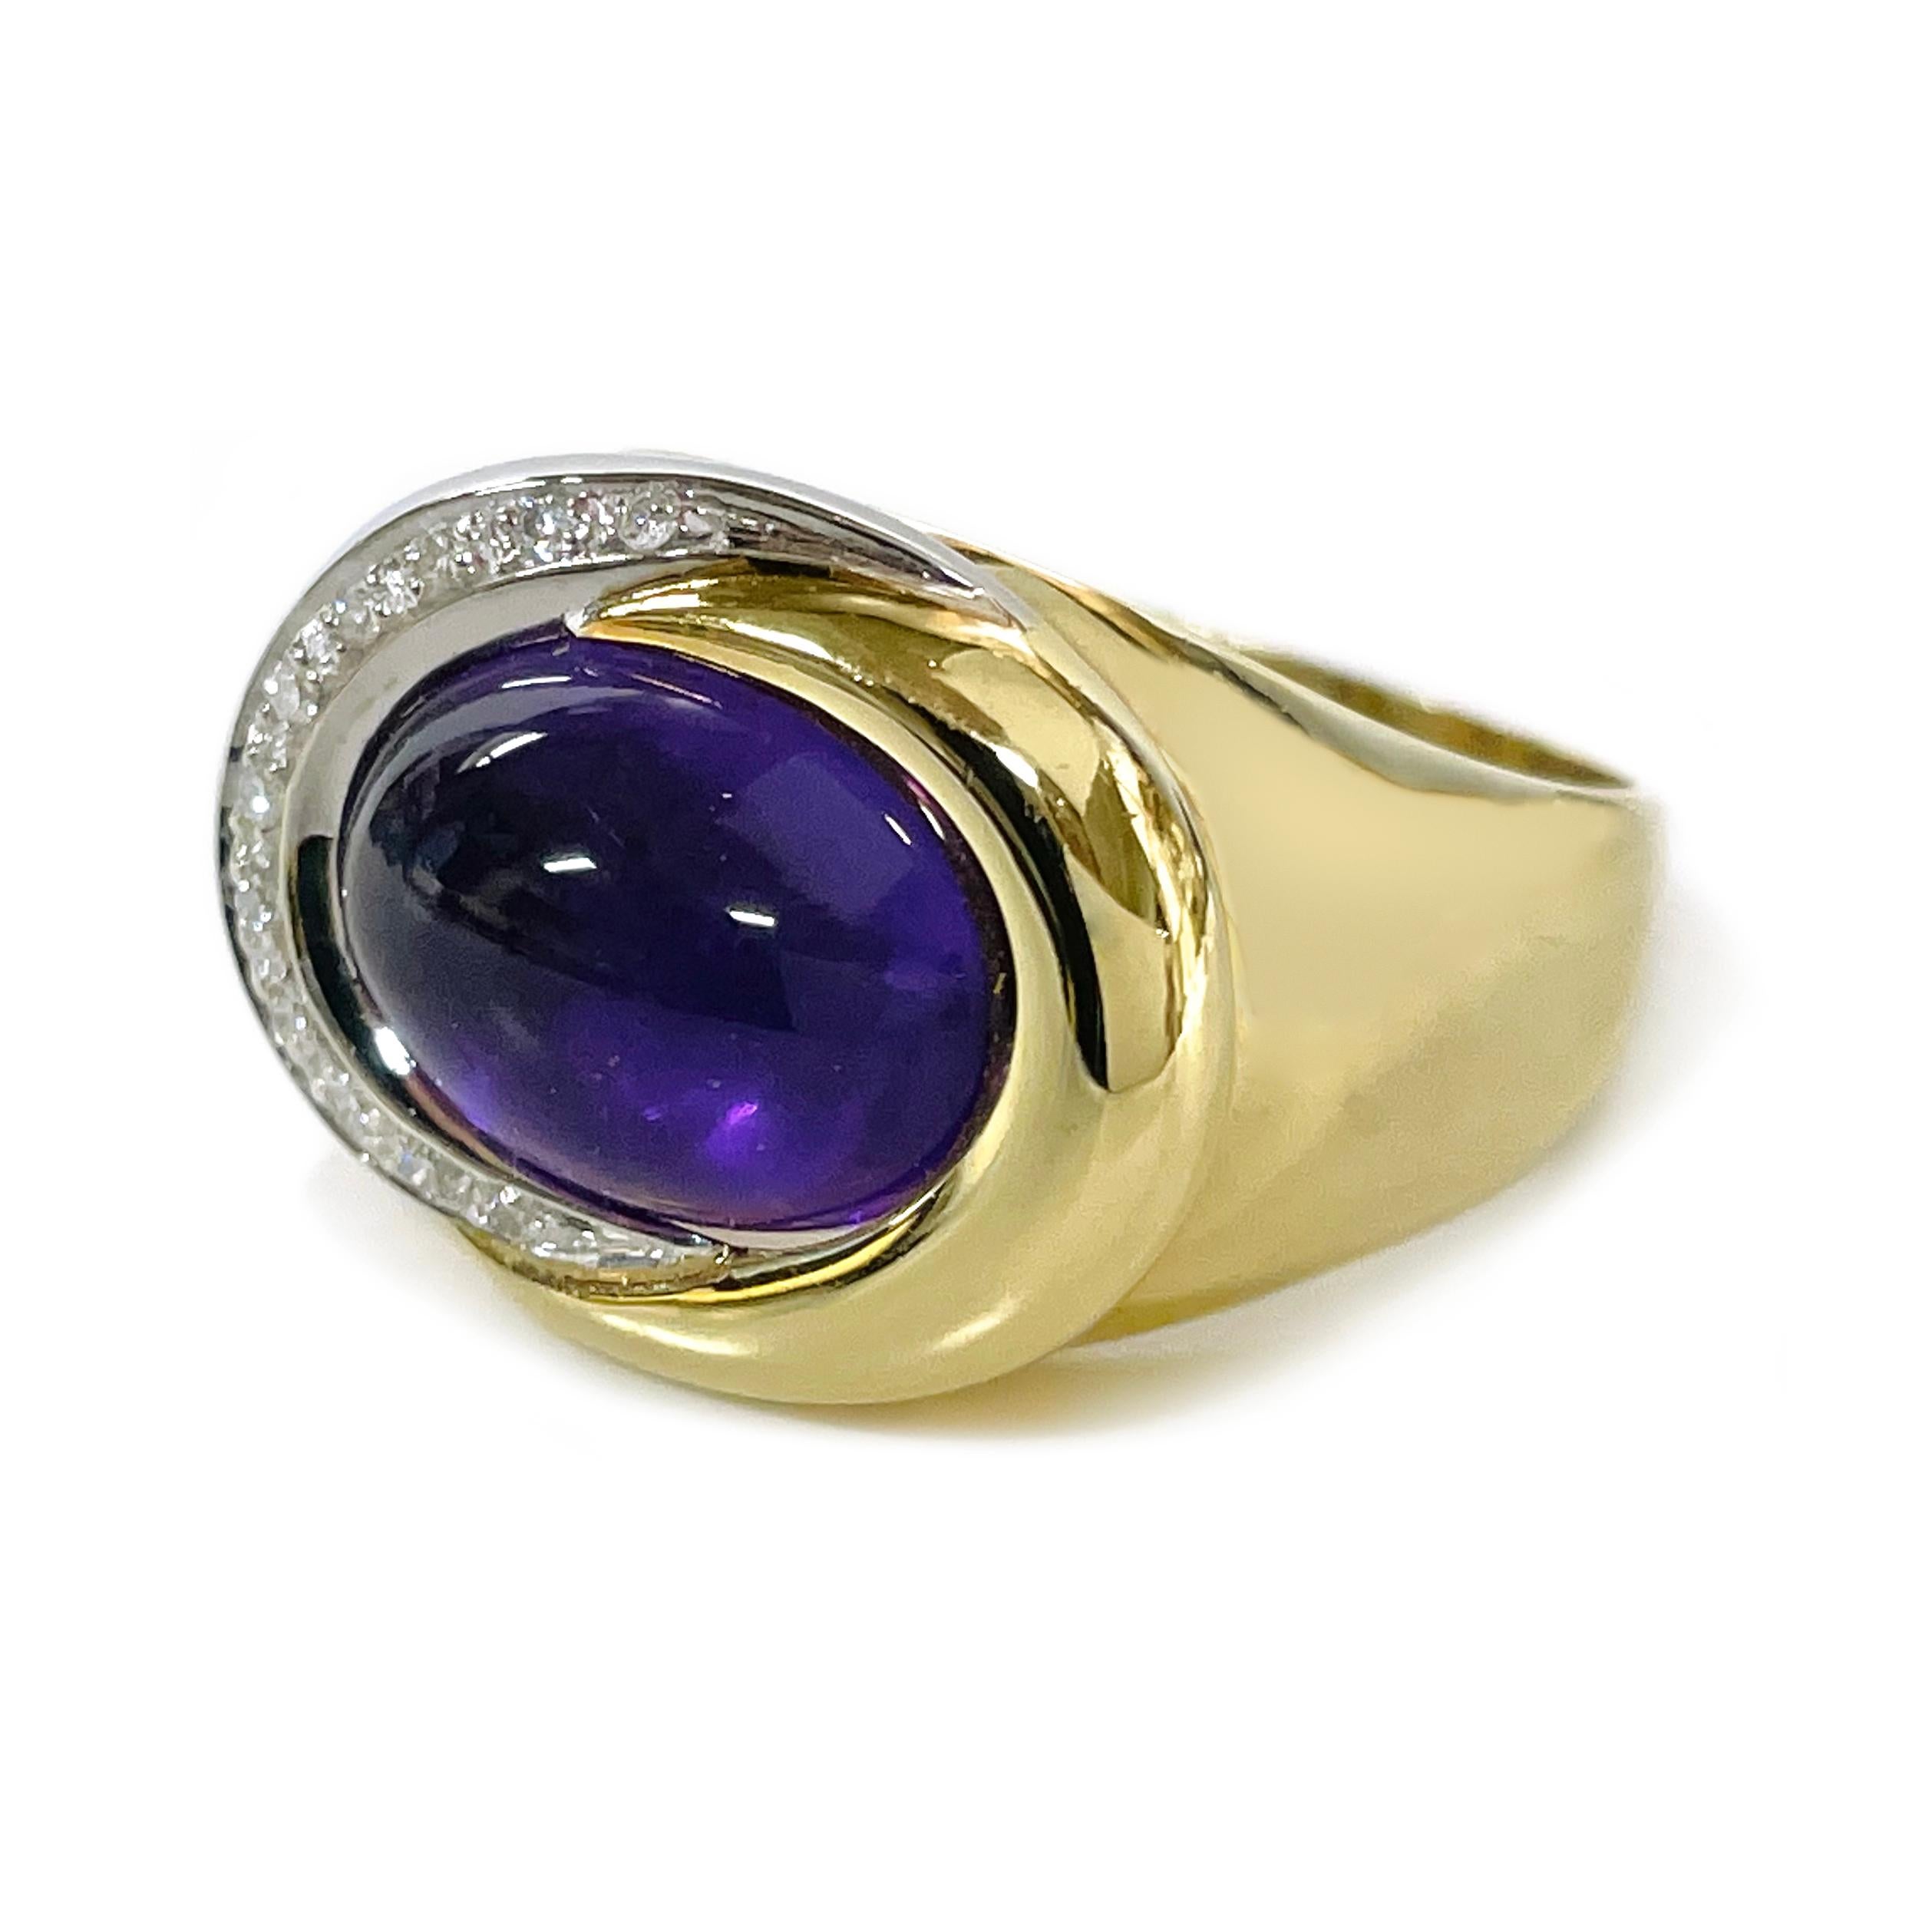 18 Karat Yellow and White Amethyst Cabochon Diamond Ring. The ring features an oval bezel-set  13.1 x 10.0mm Amethyst cabochon with a carat weight of 6.15ct. and two swooshes of gold that surround the gemstone. One of the swooshes has 12 melee